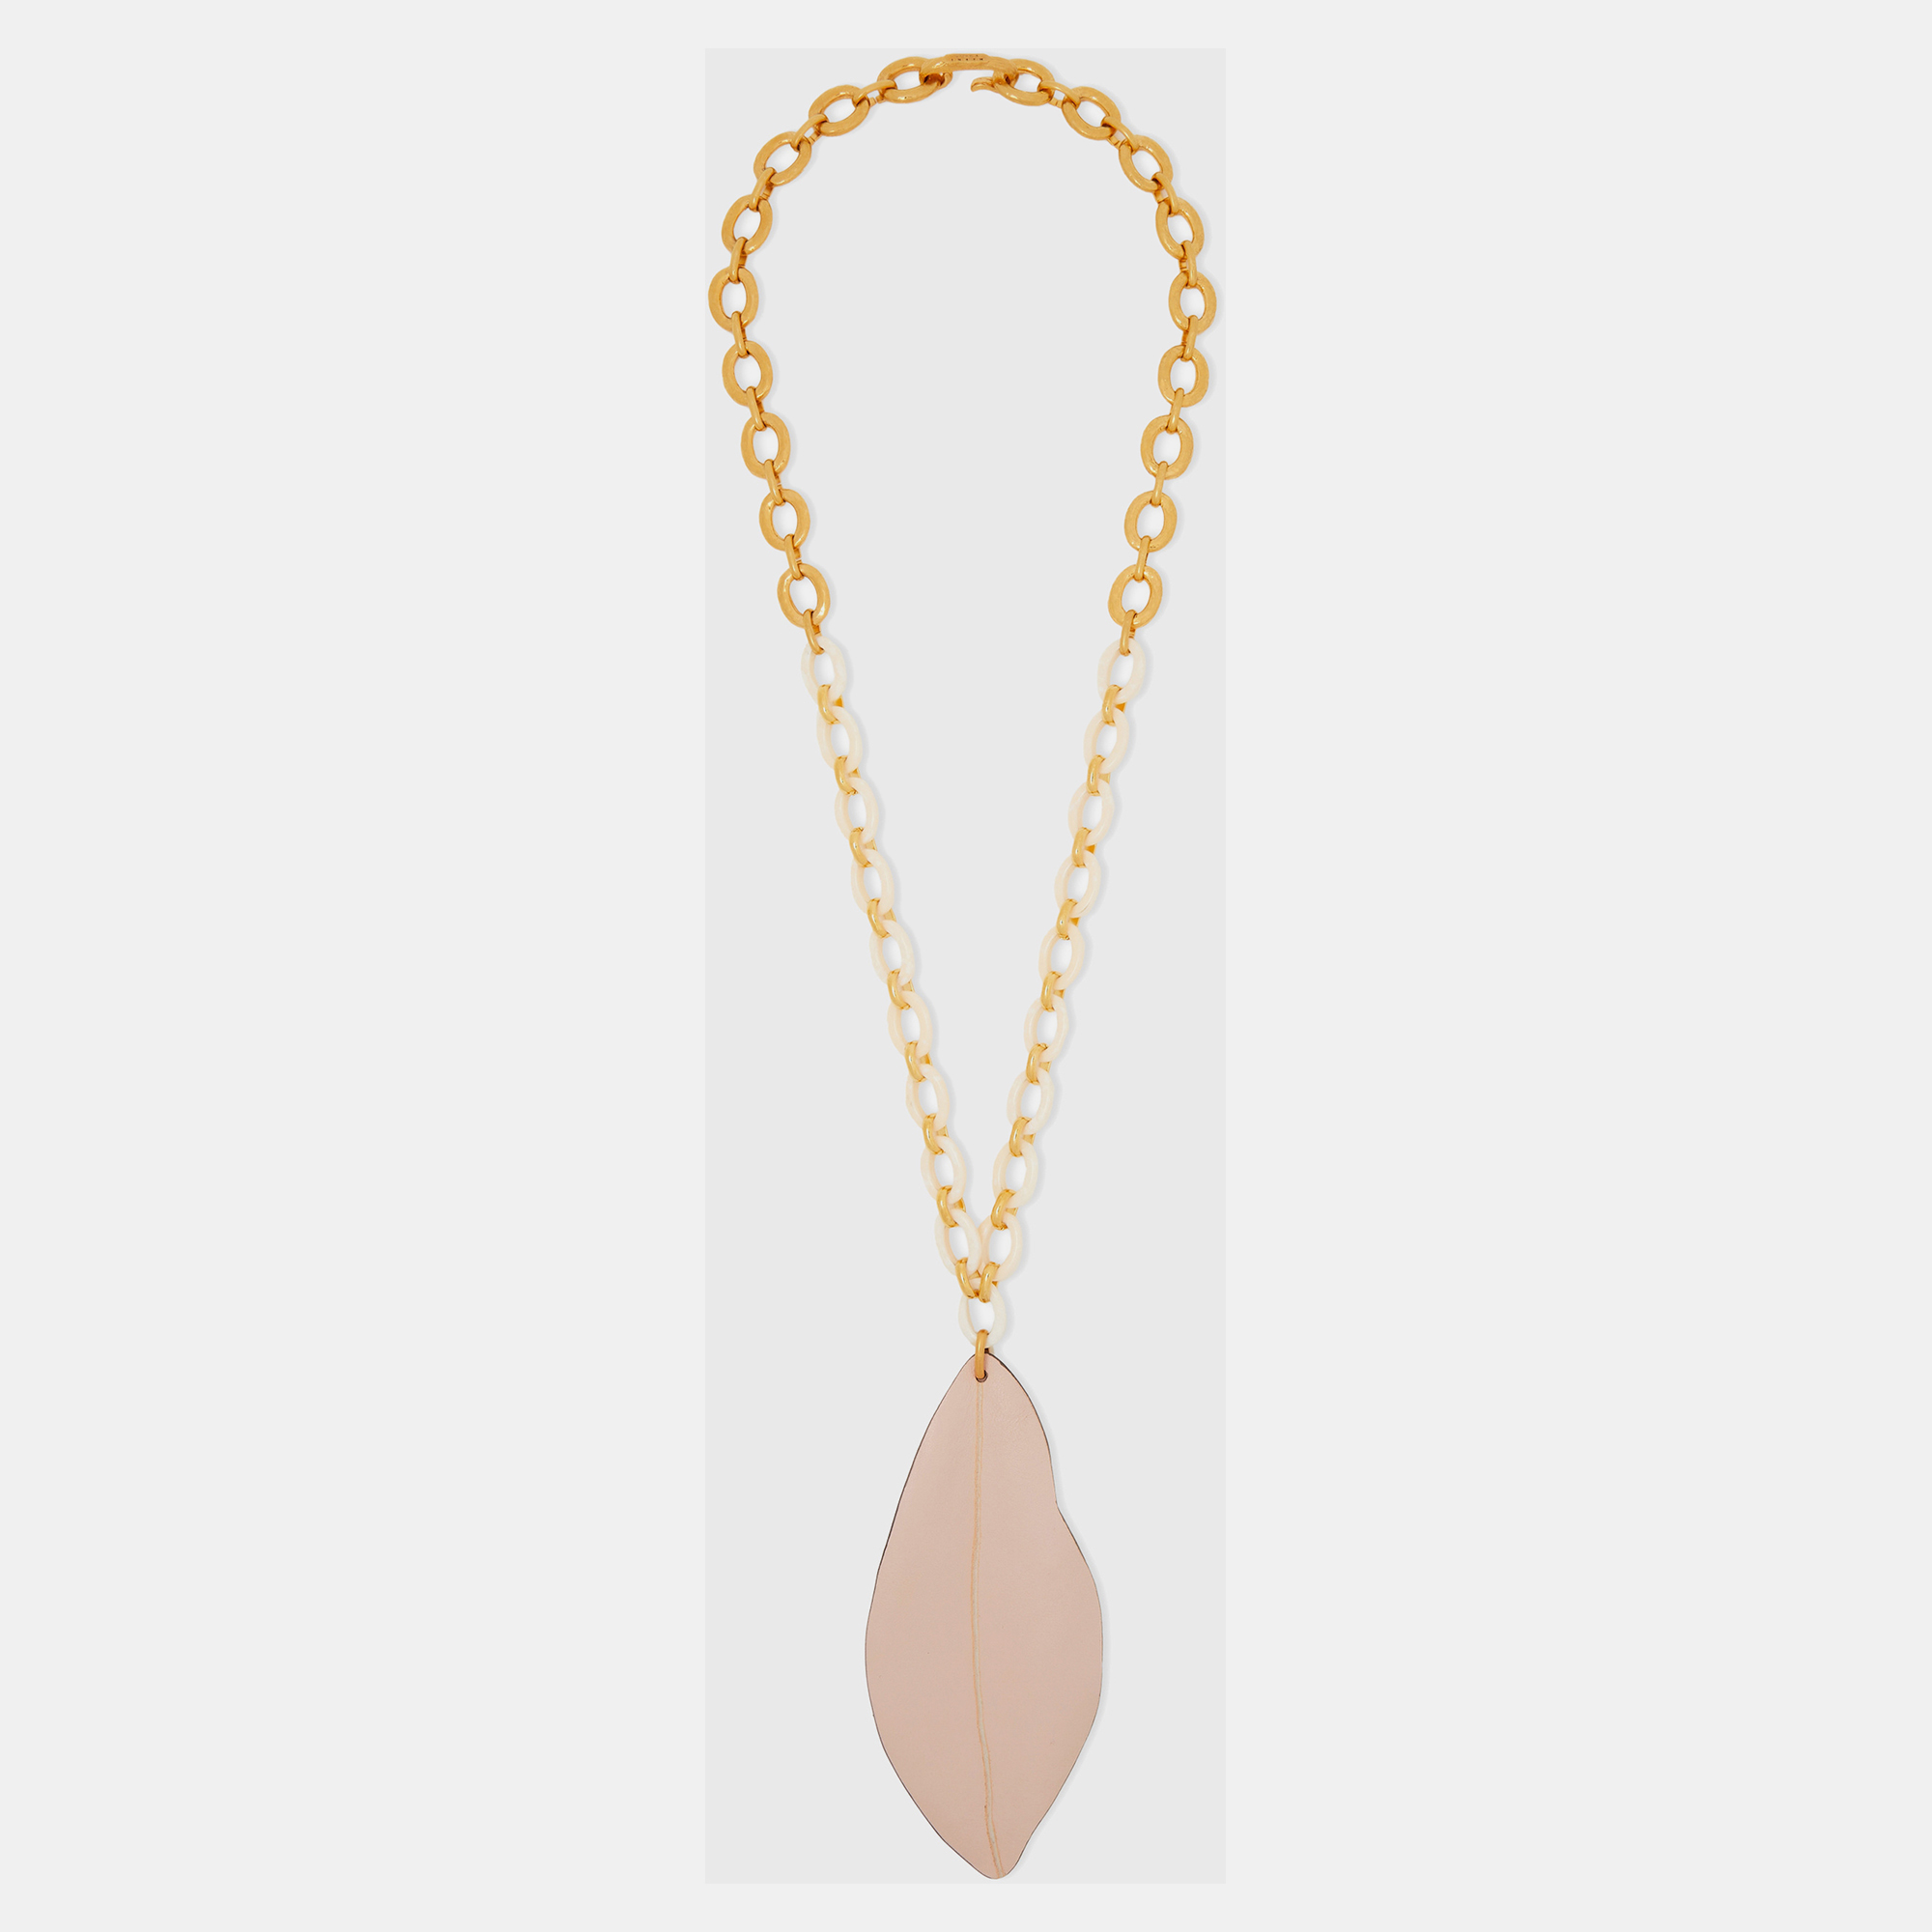 Marni leather gold tone chain link pendant necklace